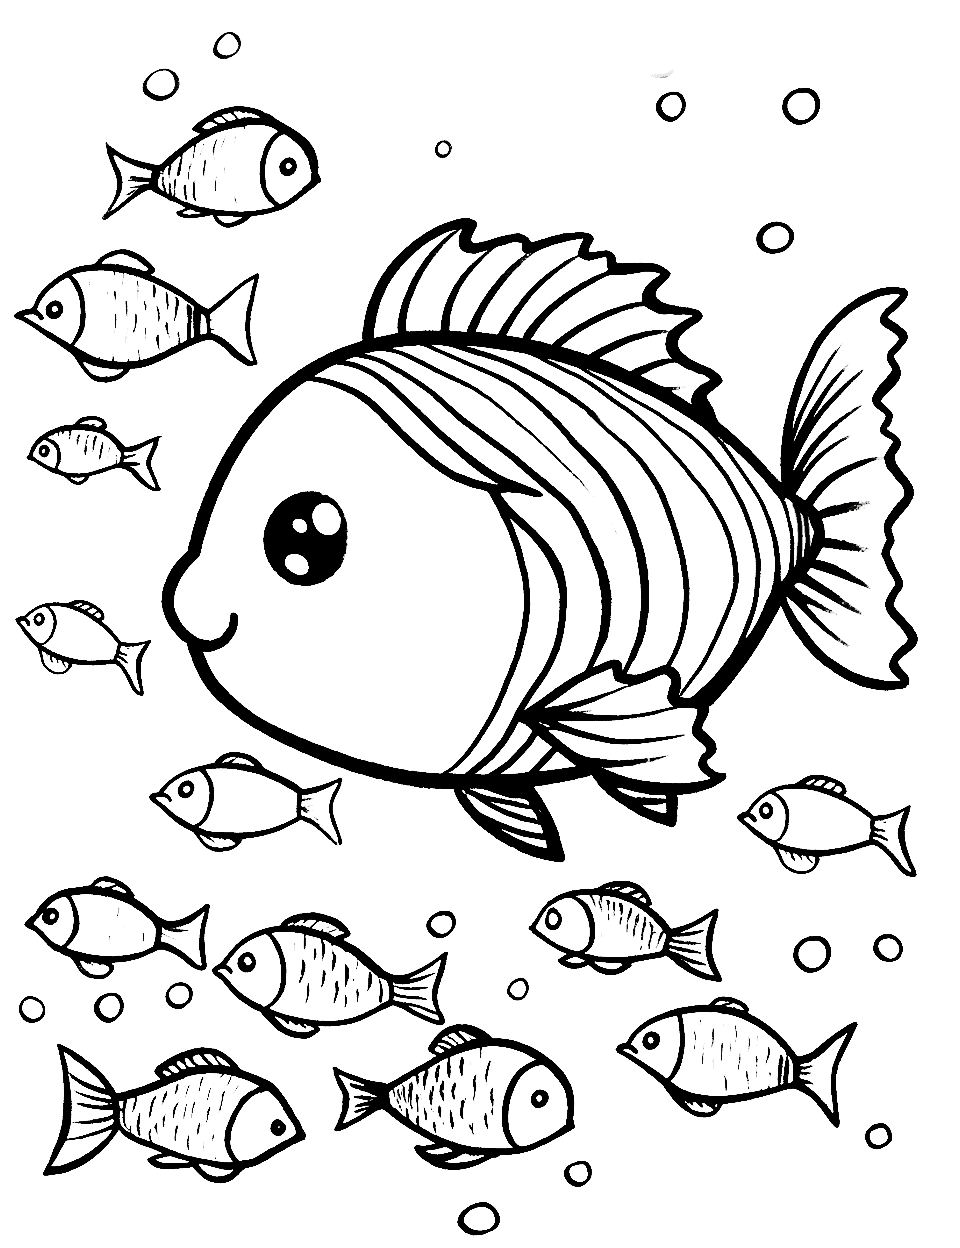 Giant Fish and Tiny Friends Coloring Page - A giant fish playing with tiny fish, showcasing the difference in size.